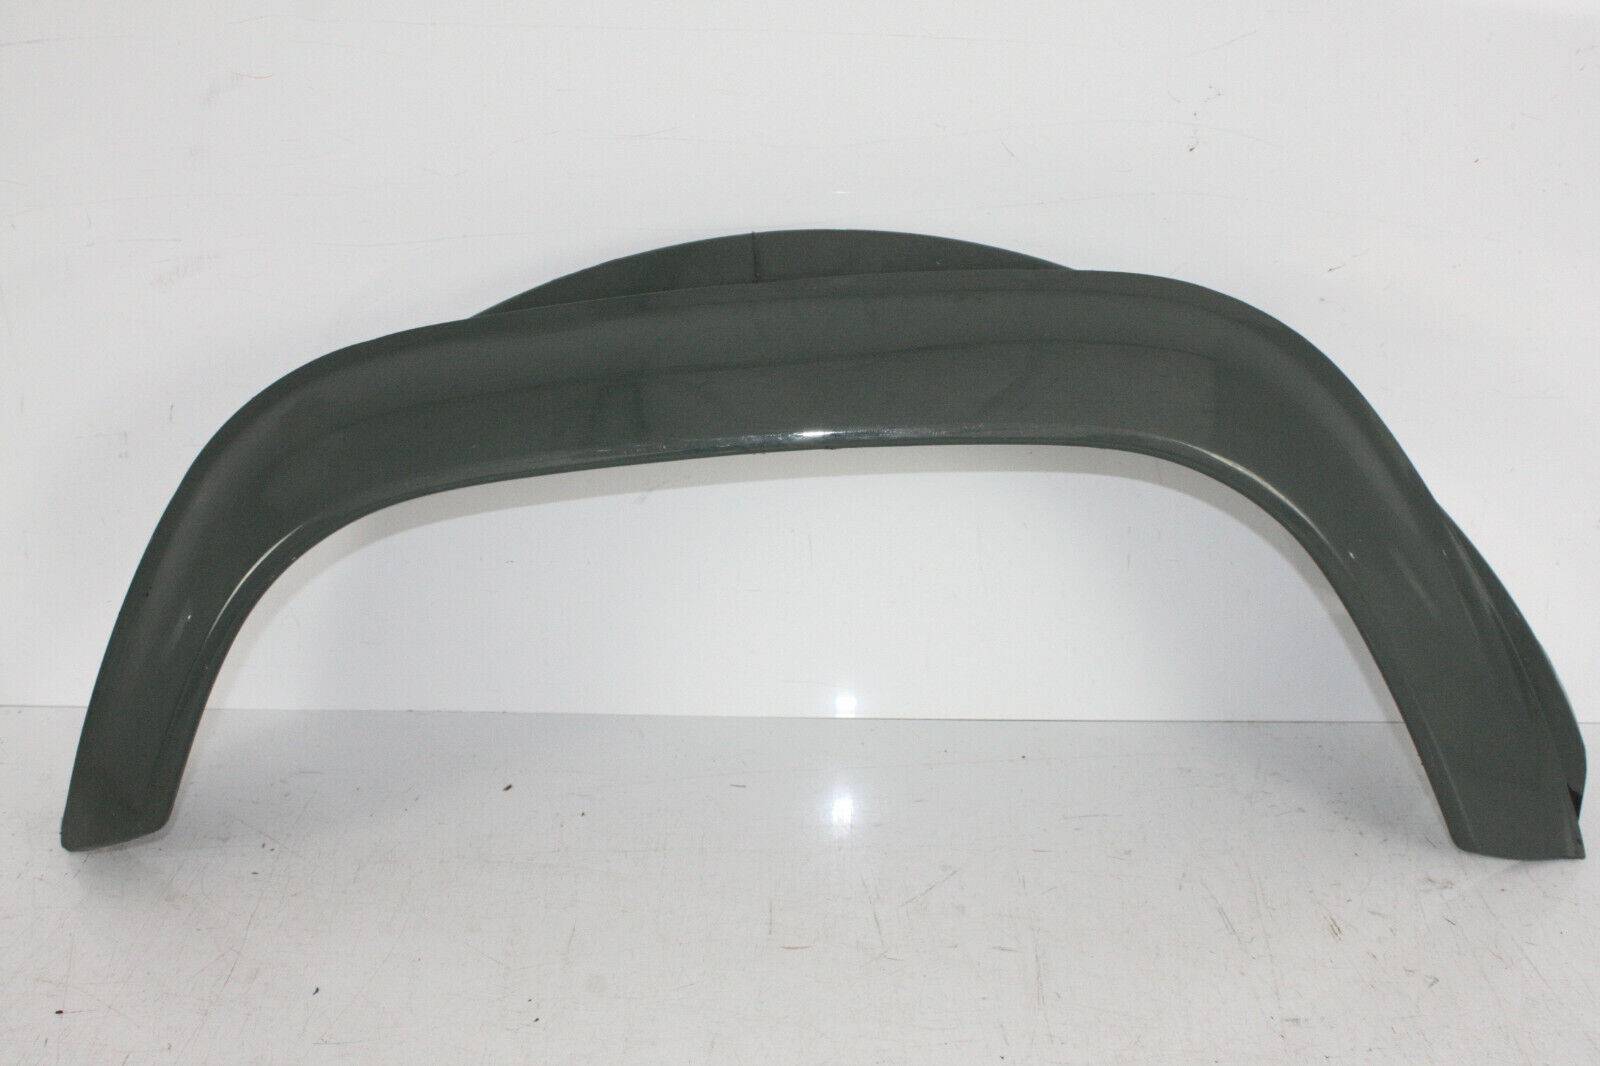 Land-Rover-Defender-Wheel-Arch-Flare-Spat-Front-Left-Painted-Type-Genuine-176479527707